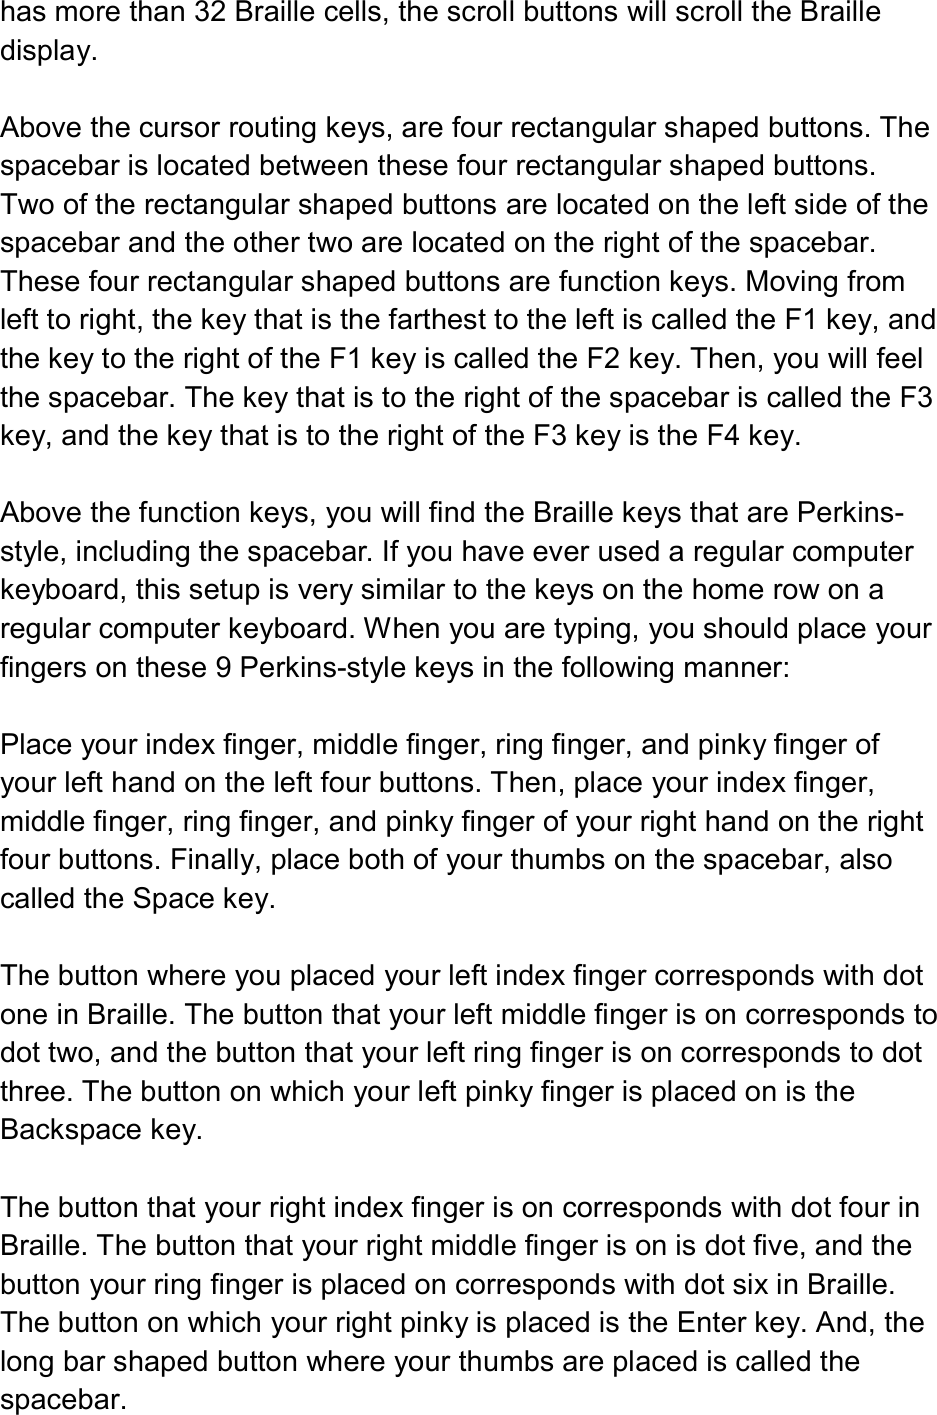  has more than 32 Braille cells, the scroll buttons will scroll the Braille display.  Above the cursor routing keys, are four rectangular shaped buttons. The spacebar is located between these four rectangular shaped buttons. Two of the rectangular shaped buttons are located on the left side of the spacebar and the other two are located on the right of the spacebar. These four rectangular shaped buttons are function keys. Moving from left to right, the key that is the farthest to the left is called the F1 key, and the key to the right of the F1 key is called the F2 key. Then, you will feel the spacebar. The key that is to the right of the spacebar is called the F3 key, and the key that is to the right of the F3 key is the F4 key.  Above the function keys, you will find the Braille keys that are Perkins-style, including the spacebar. If you have ever used a regular computer keyboard, this setup is very similar to the keys on the home row on a regular computer keyboard. When you are typing, you should place your fingers on these 9 Perkins-style keys in the following manner:  Place your index finger, middle finger, ring finger, and pinky finger of your left hand on the left four buttons. Then, place your index finger, middle finger, ring finger, and pinky finger of your right hand on the right four buttons. Finally, place both of your thumbs on the spacebar, also called the Space key.  The button where you placed your left index finger corresponds with dot one in Braille. The button that your left middle finger is on corresponds to dot two, and the button that your left ring finger is on corresponds to dot three. The button on which your left pinky finger is placed on is the Backspace key.  The button that your right index finger is on corresponds with dot four in Braille. The button that your right middle finger is on is dot five, and the button your ring finger is placed on corresponds with dot six in Braille. The button on which your right pinky is placed is the Enter key. And, the long bar shaped button where your thumbs are placed is called the spacebar. 